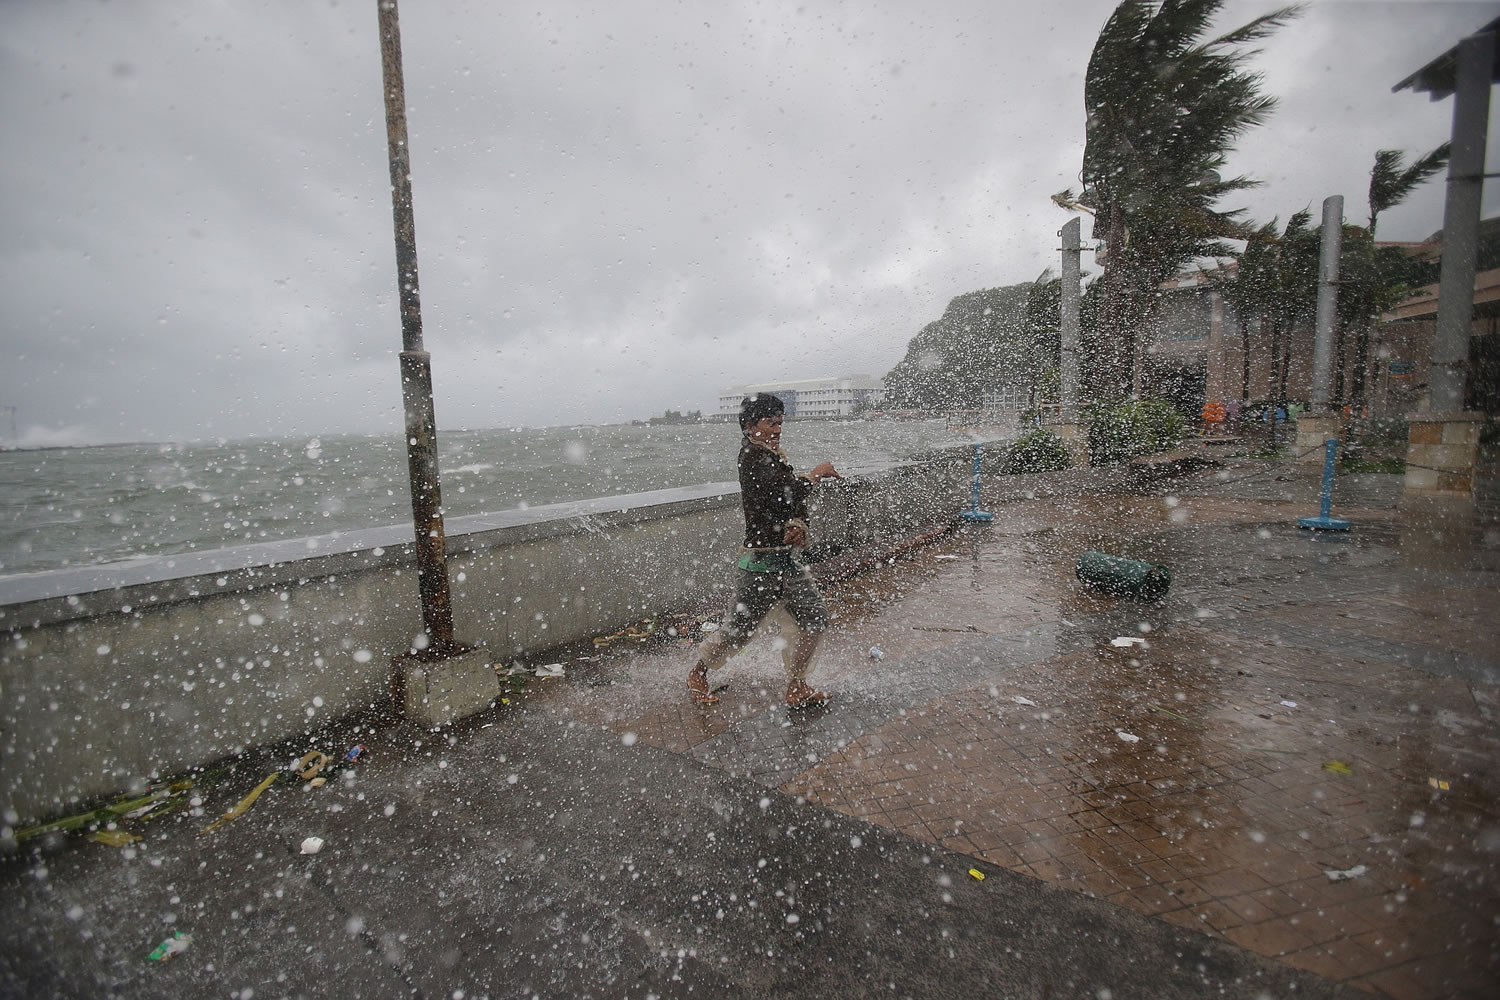 A man reacts as he strong winds and rain from Typhoon Hagupit hit shore in Legazpi, Albay province, eastern Philippines on Sunday.